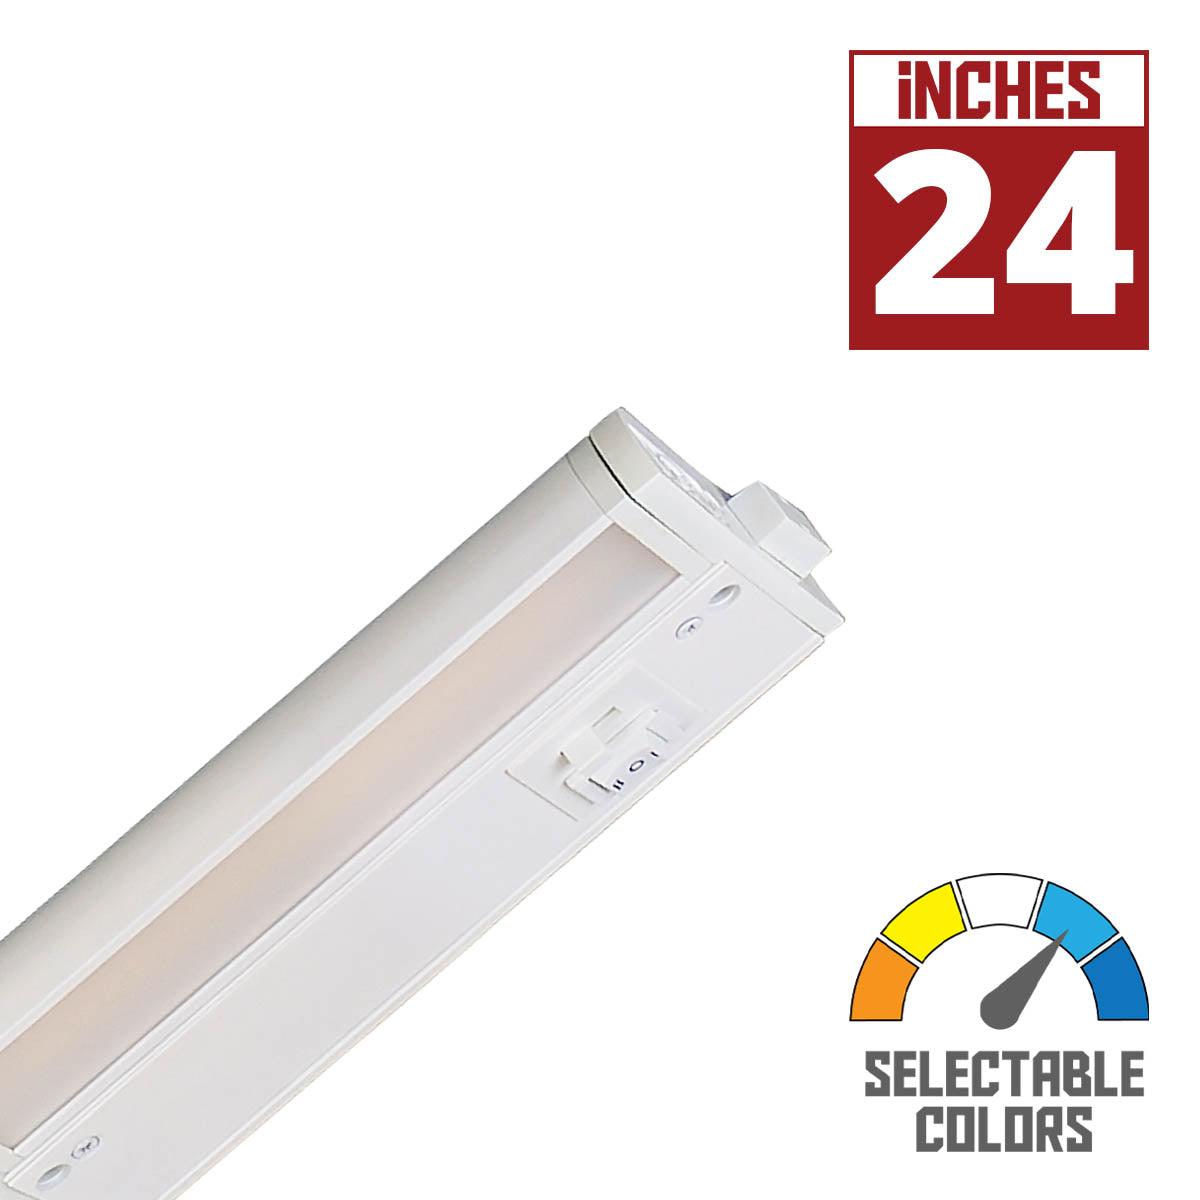 CounterMax 5K 24 Inch Under Cabinet LED Light with Patent gimbals, 1560 Lumens, Linkable, CCT Selectable 2700K to 5000K, 120V - Bees Lighting